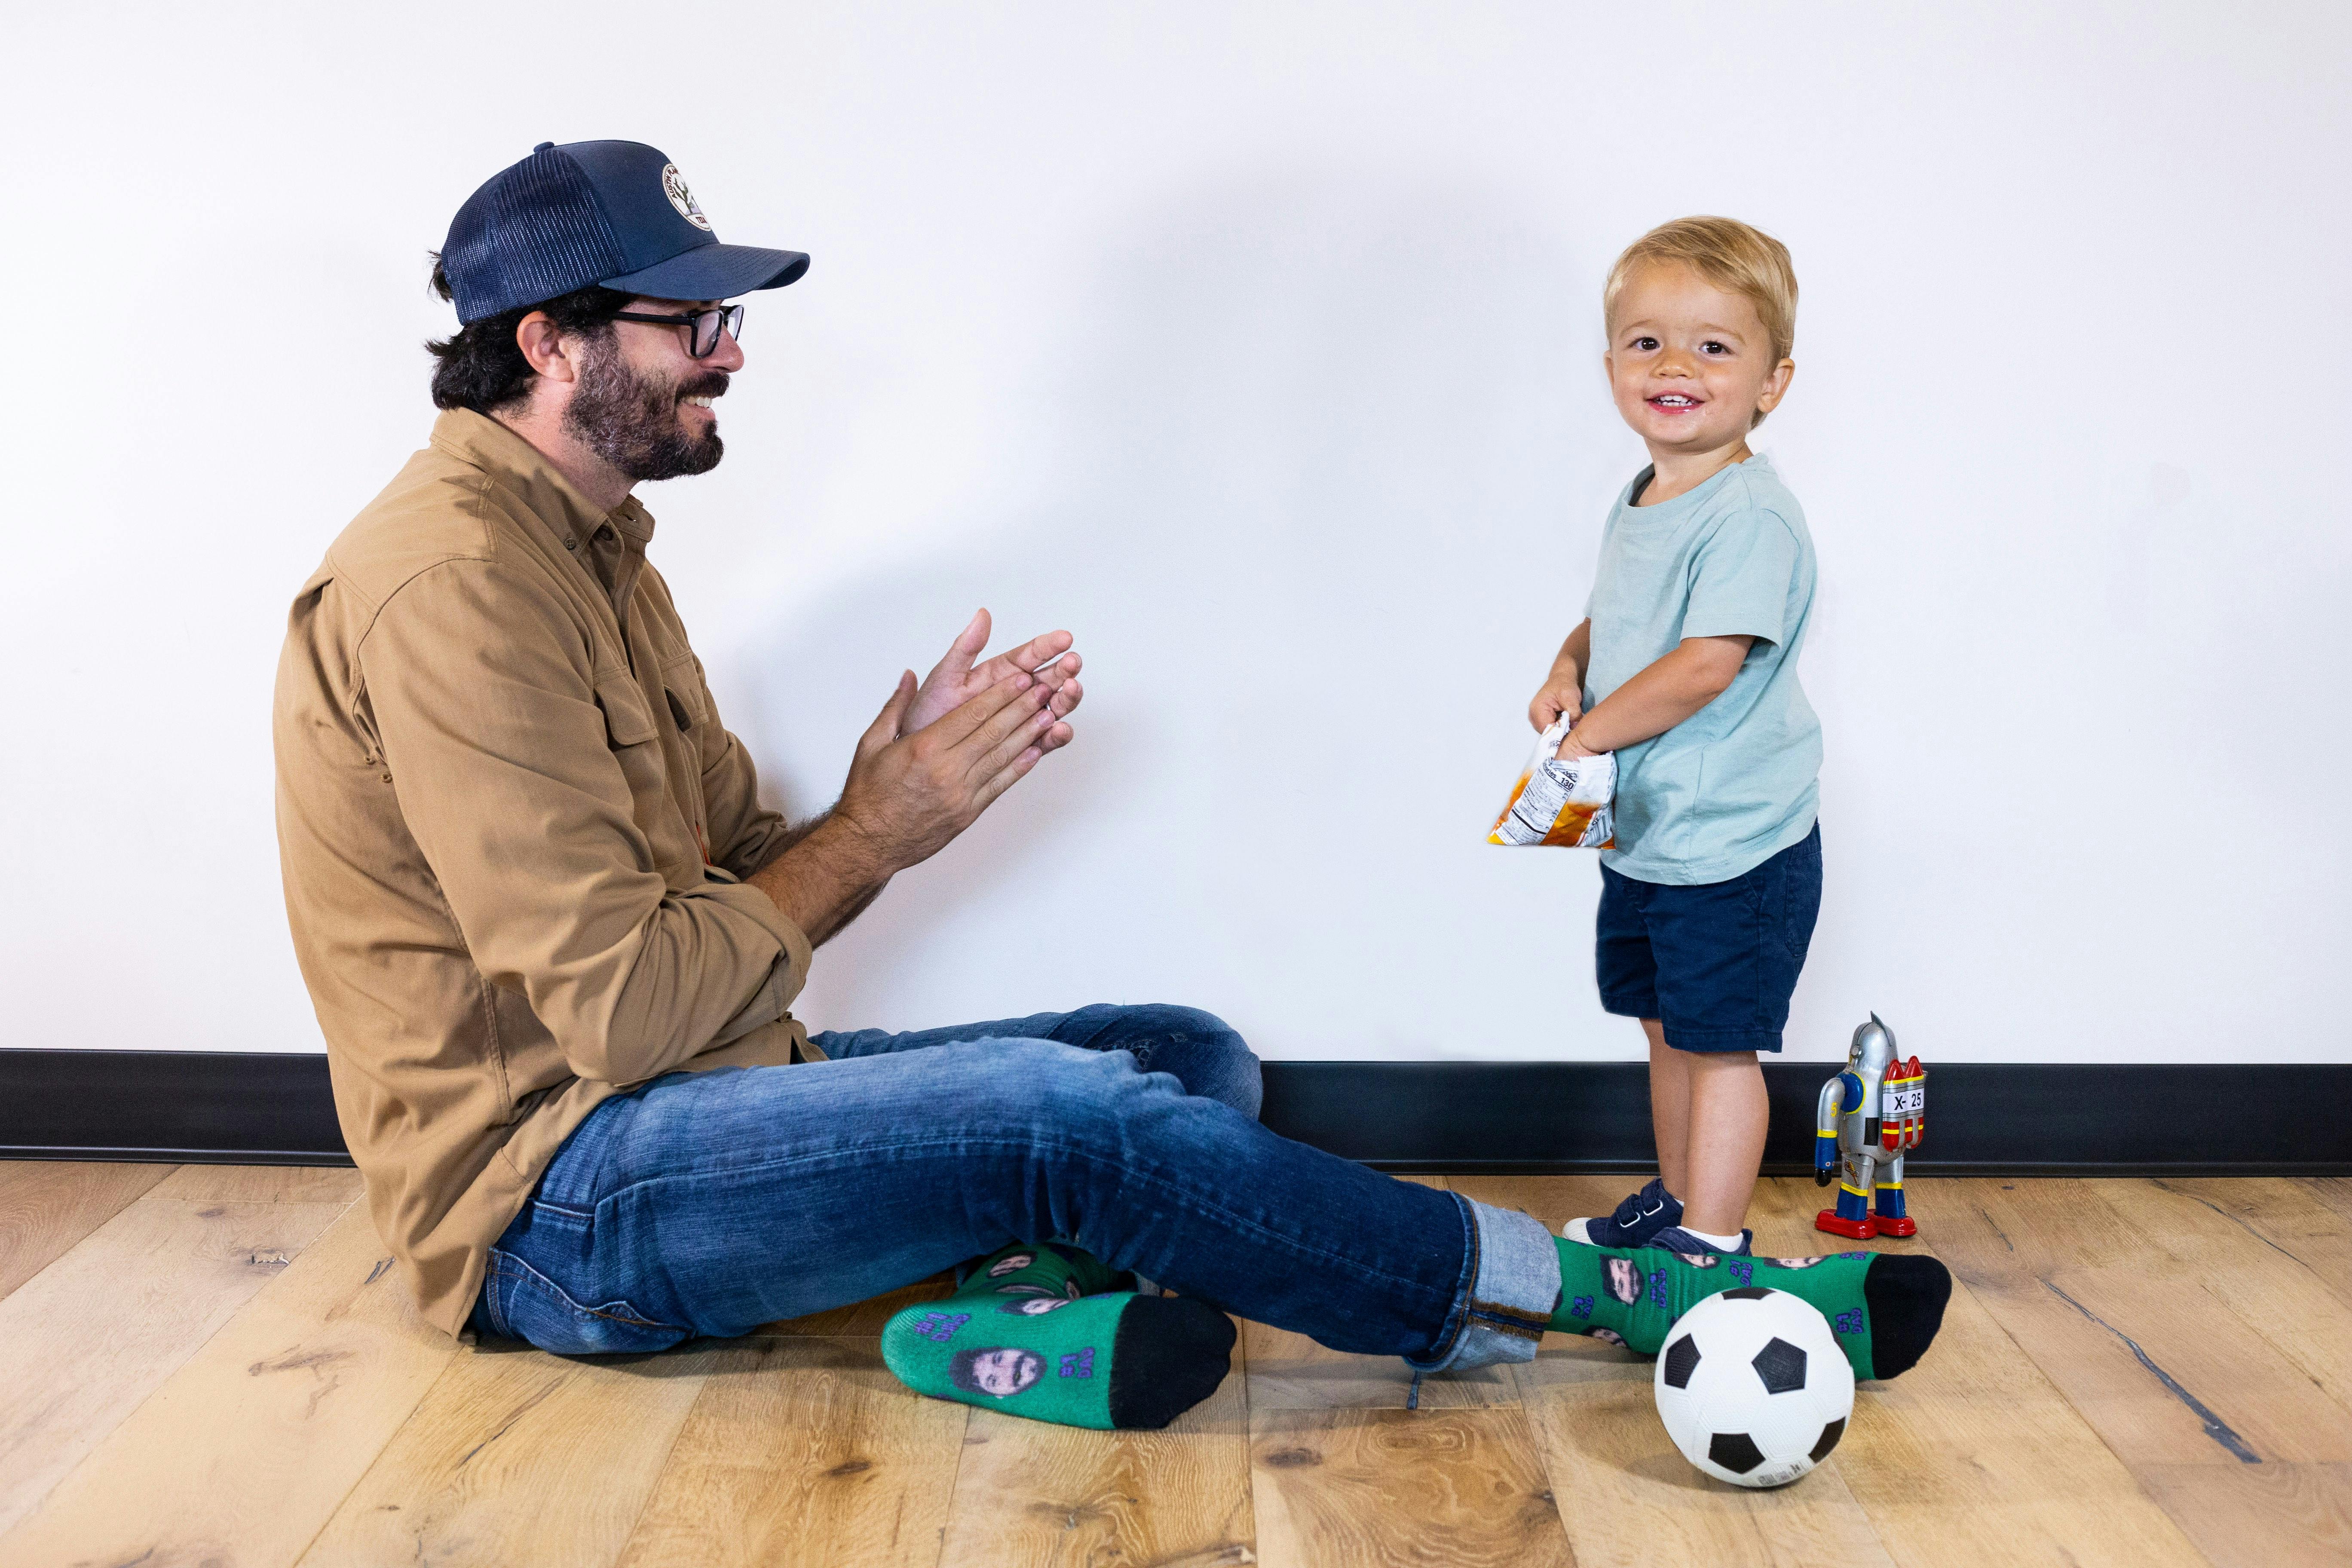 #1 Father's Day gift ideas ranked from low budget to high. 